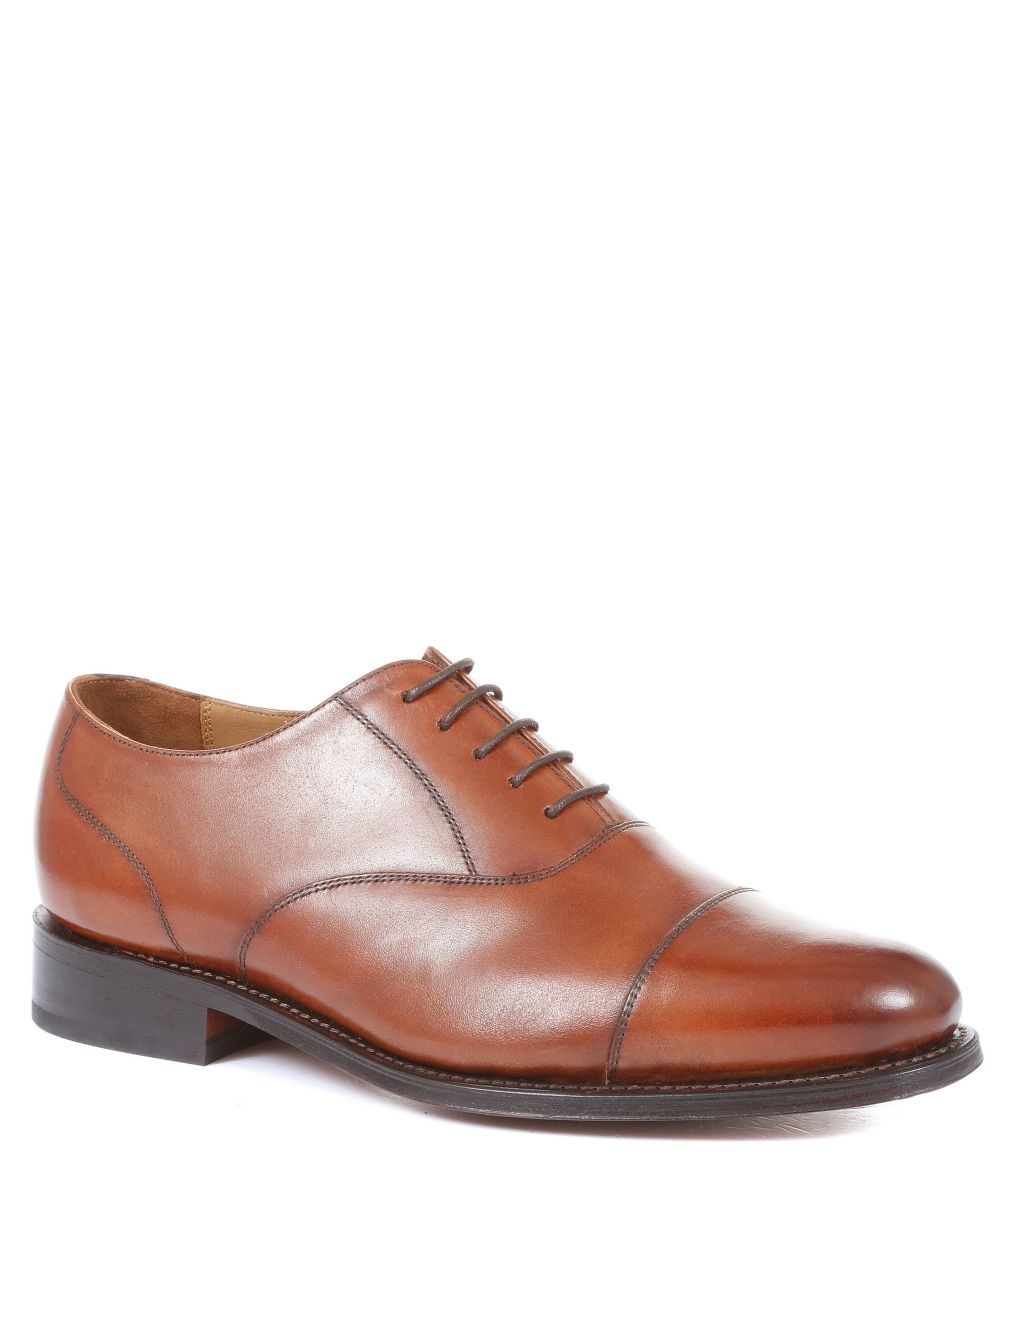 Leather Goodyear Welted Oxford Shoes image 3